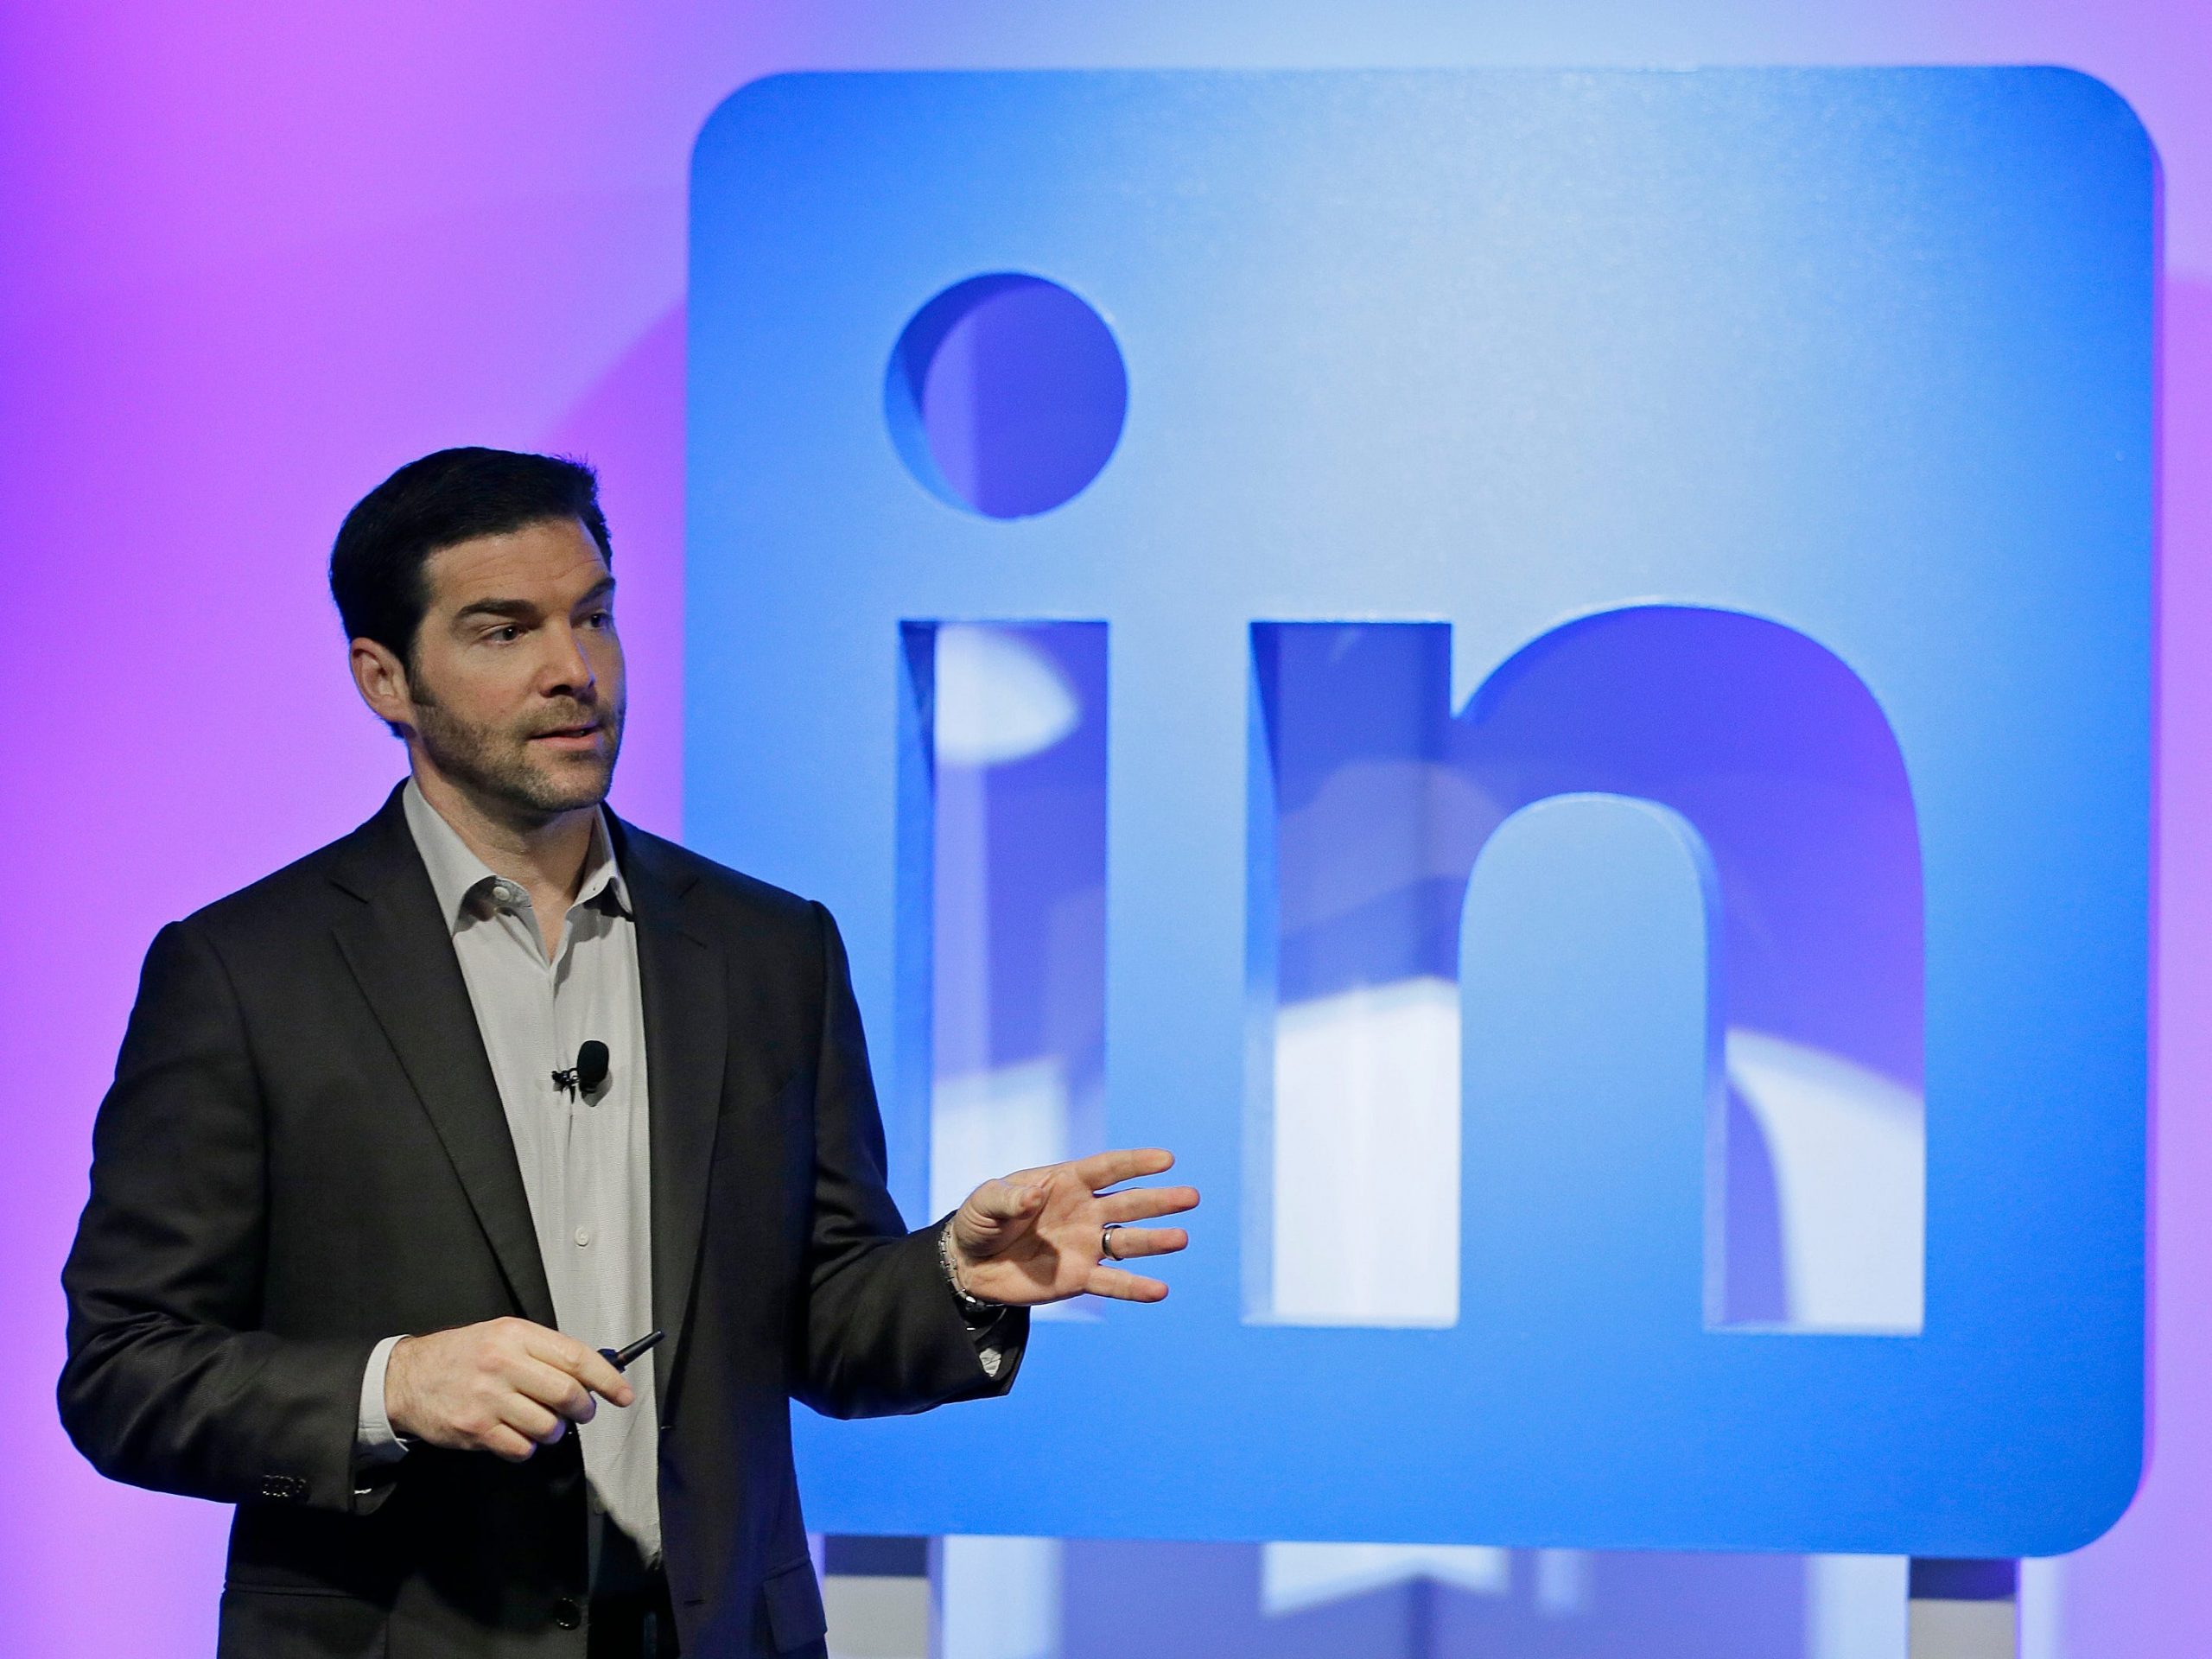 Former LinkedIn CEP and current executive chairman Jeff Weiner speaks at the company's San Francisco headquarters in 2016.